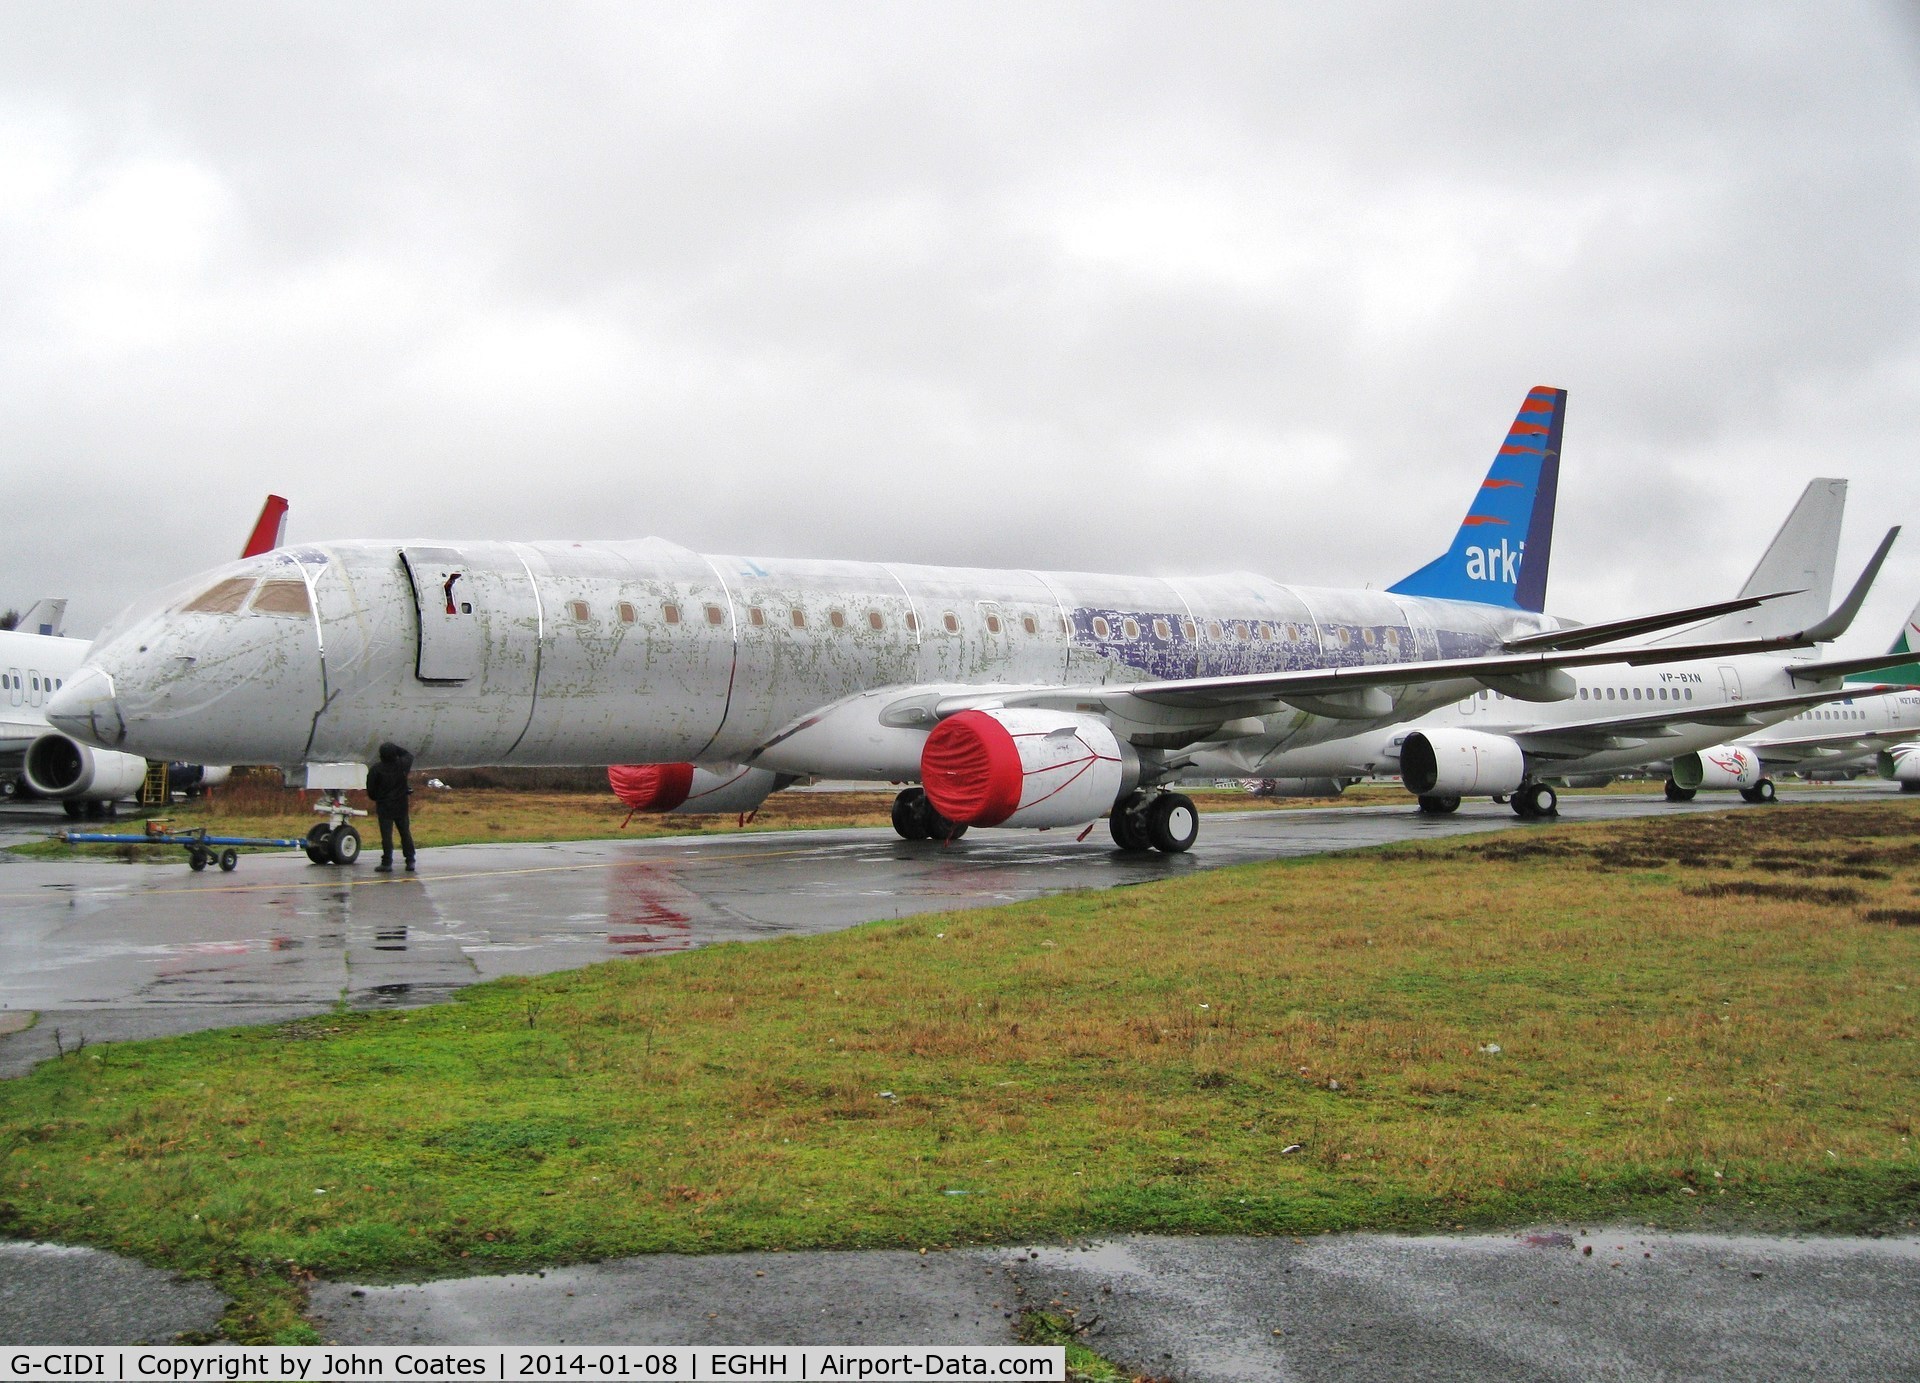 G-CIDI, 2013 Embraer 190LR (ERJ-190-100LR) C/N 19000616, Reported some body repairs required before painting is completed